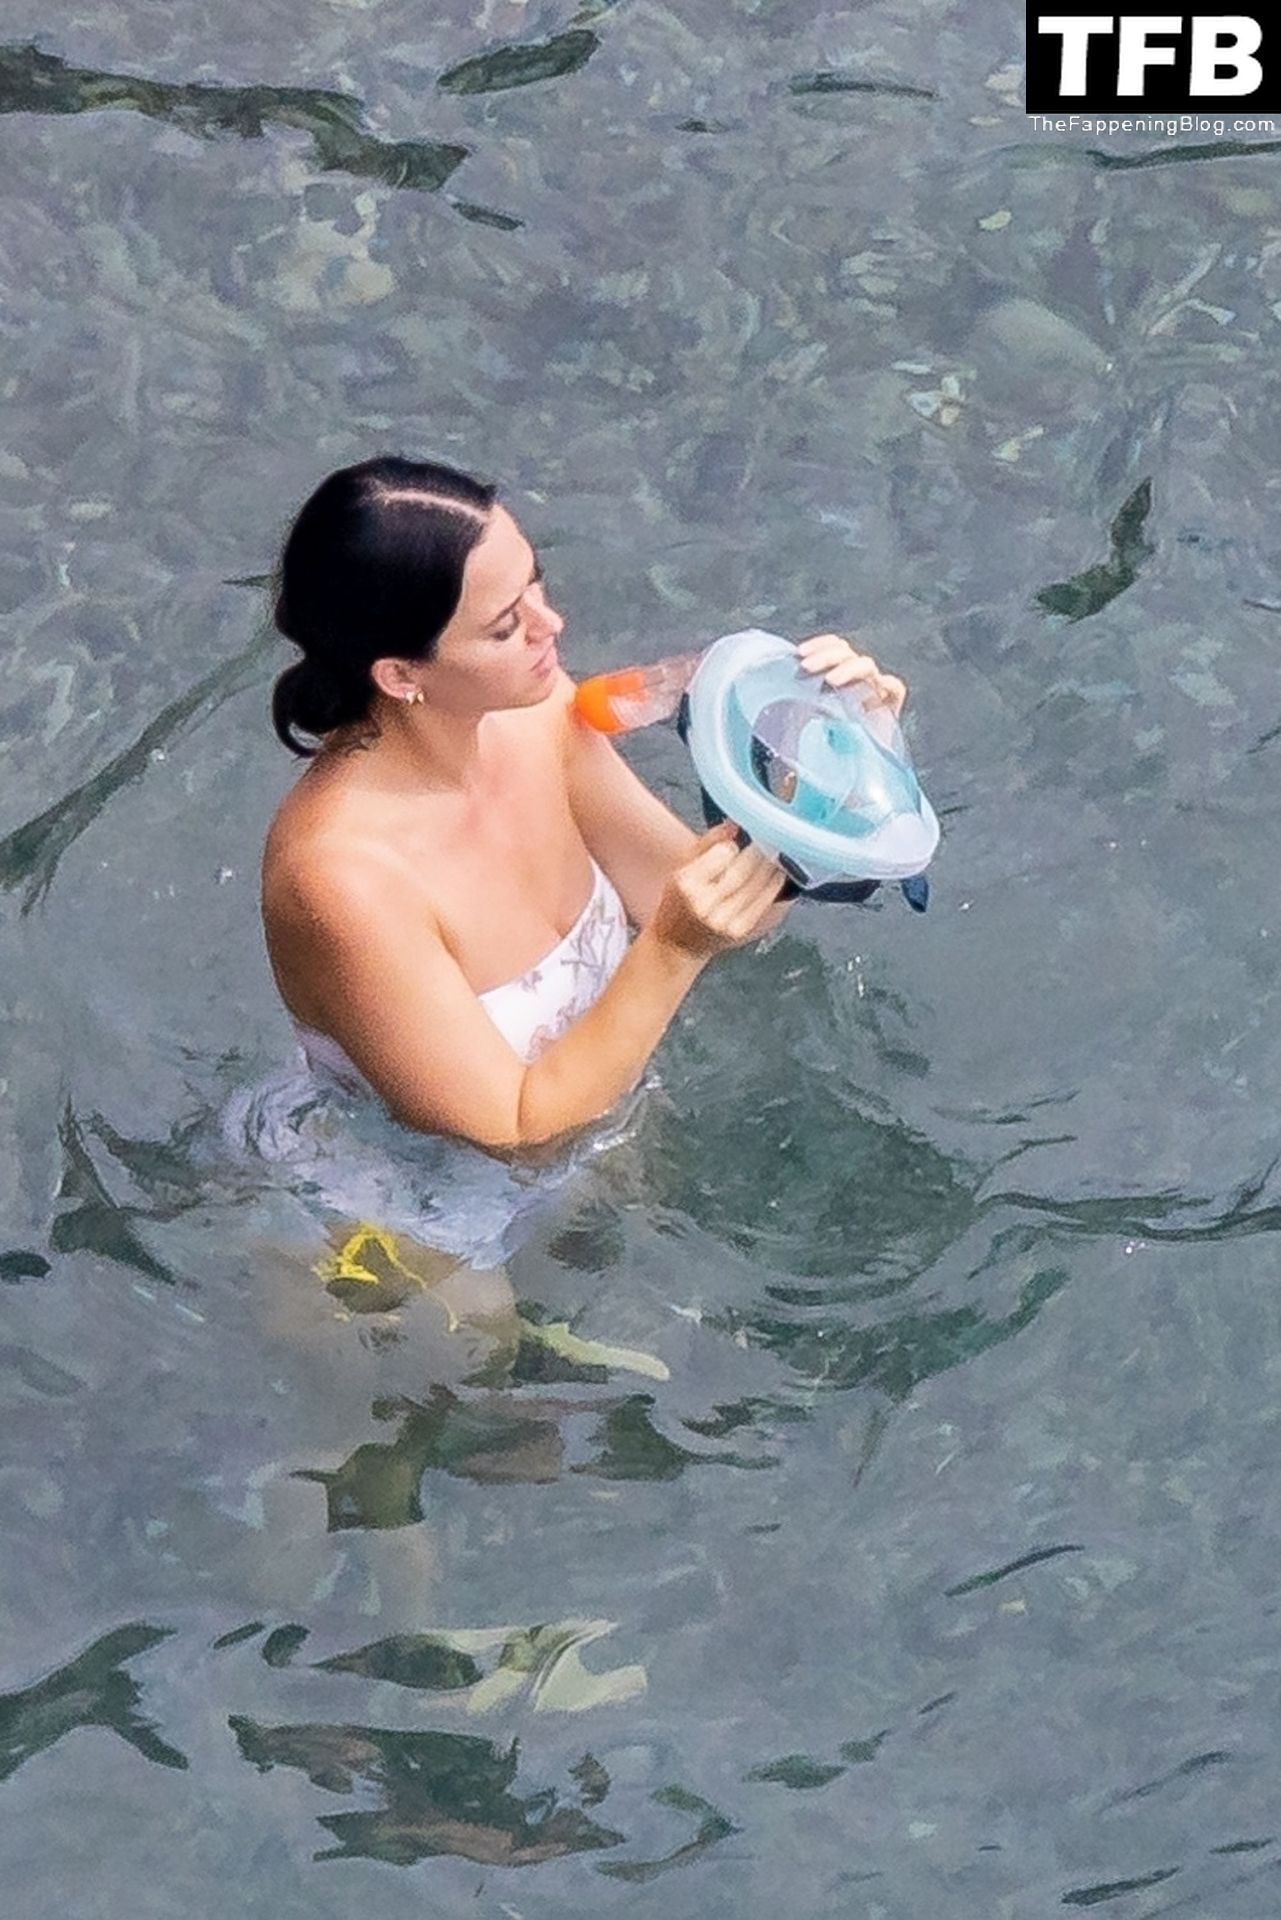 Katy Perry Sexy The Fappening Blog 40 - Katy Perry Rocks a Strapless Swimsuit While Enjoying a Beach Day with Orlando Bloom in Positano (105 Photos)